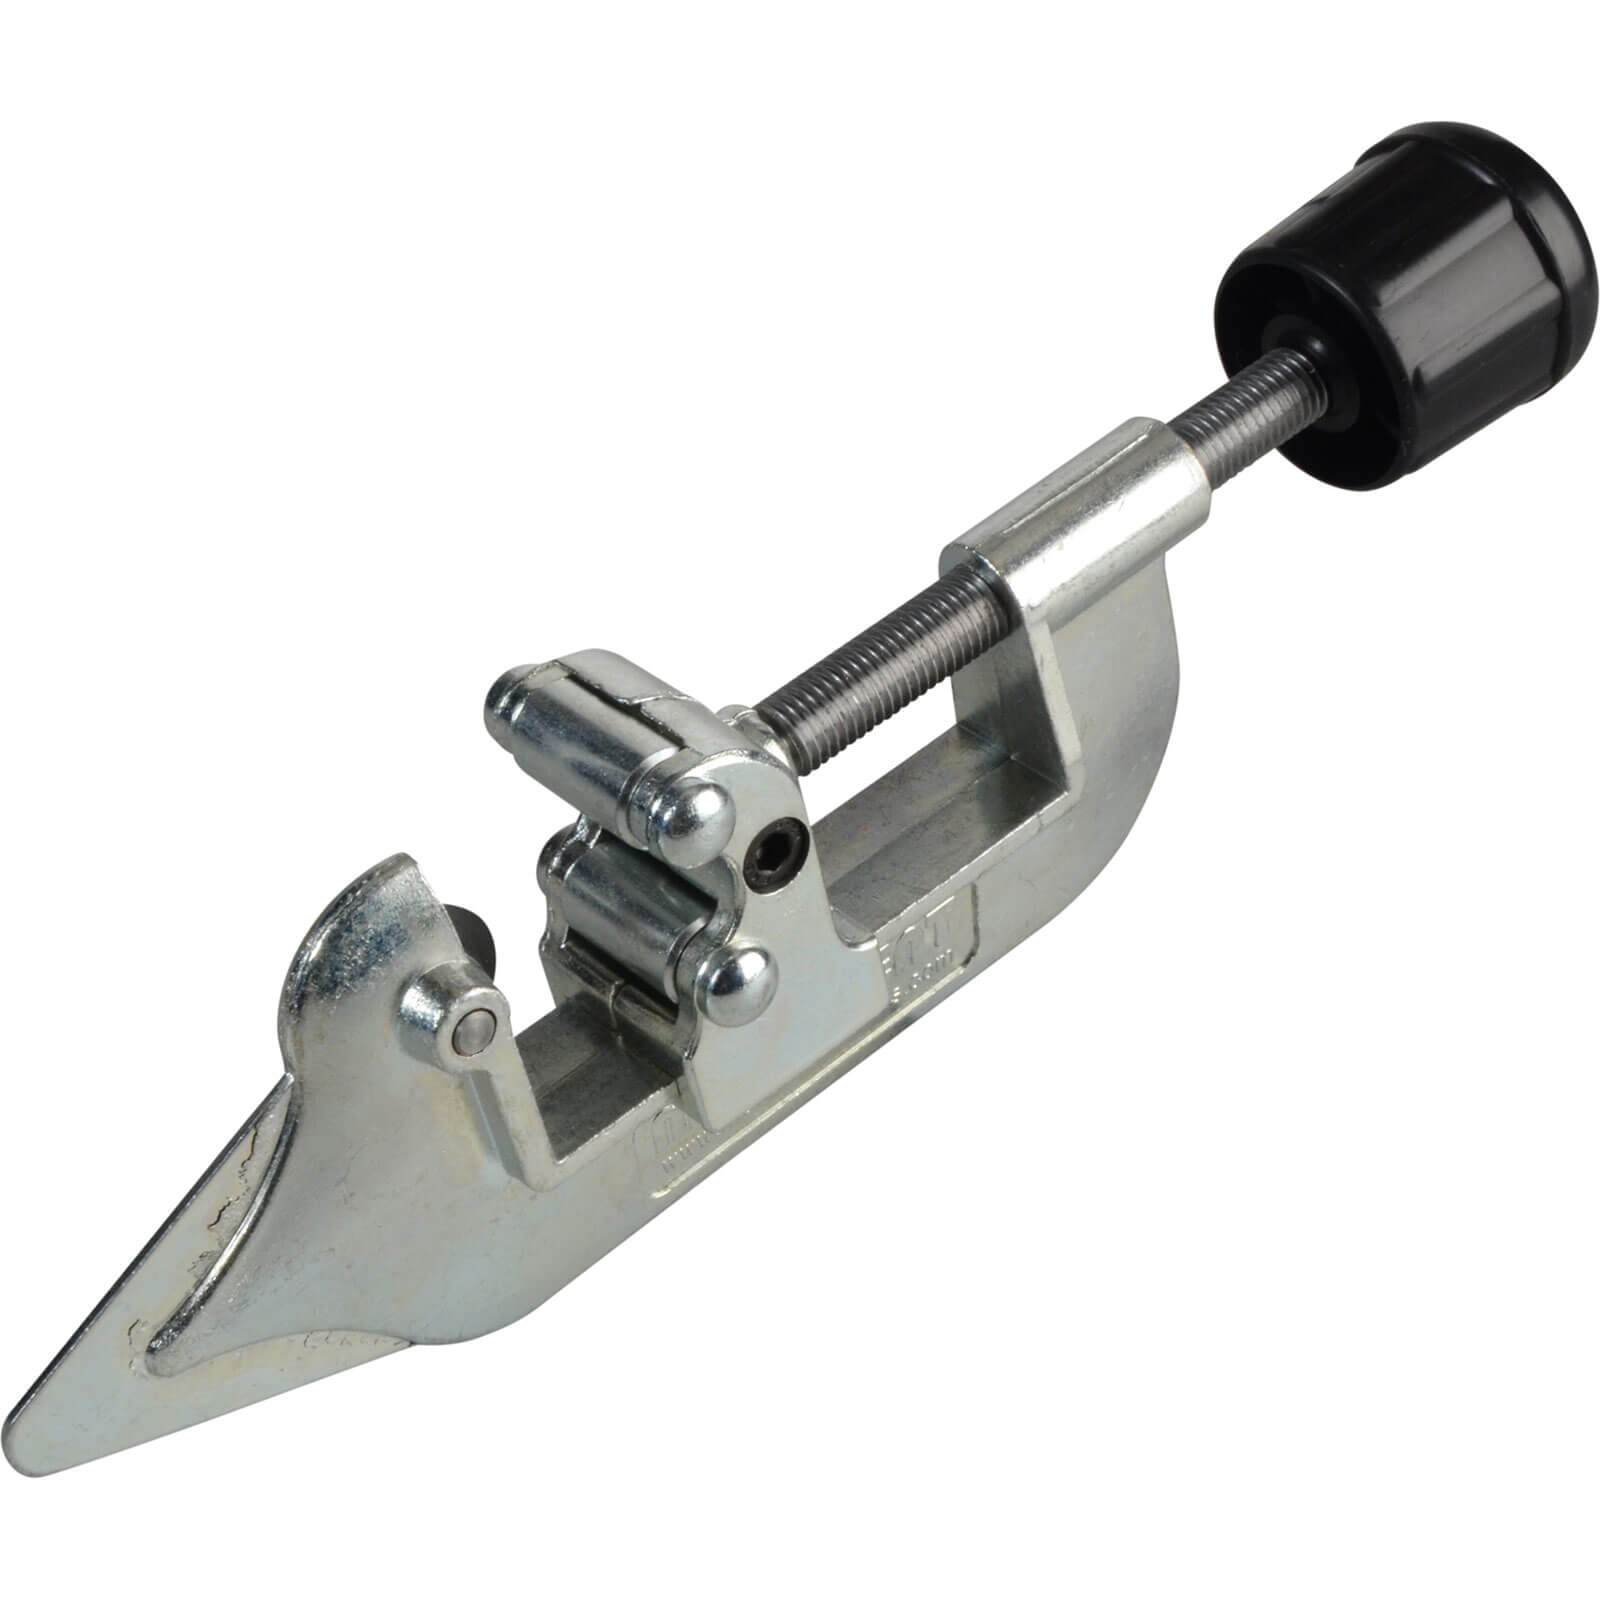 Photo of Monument Professional Adjustable Pipe Cutter 12mm - 43mm